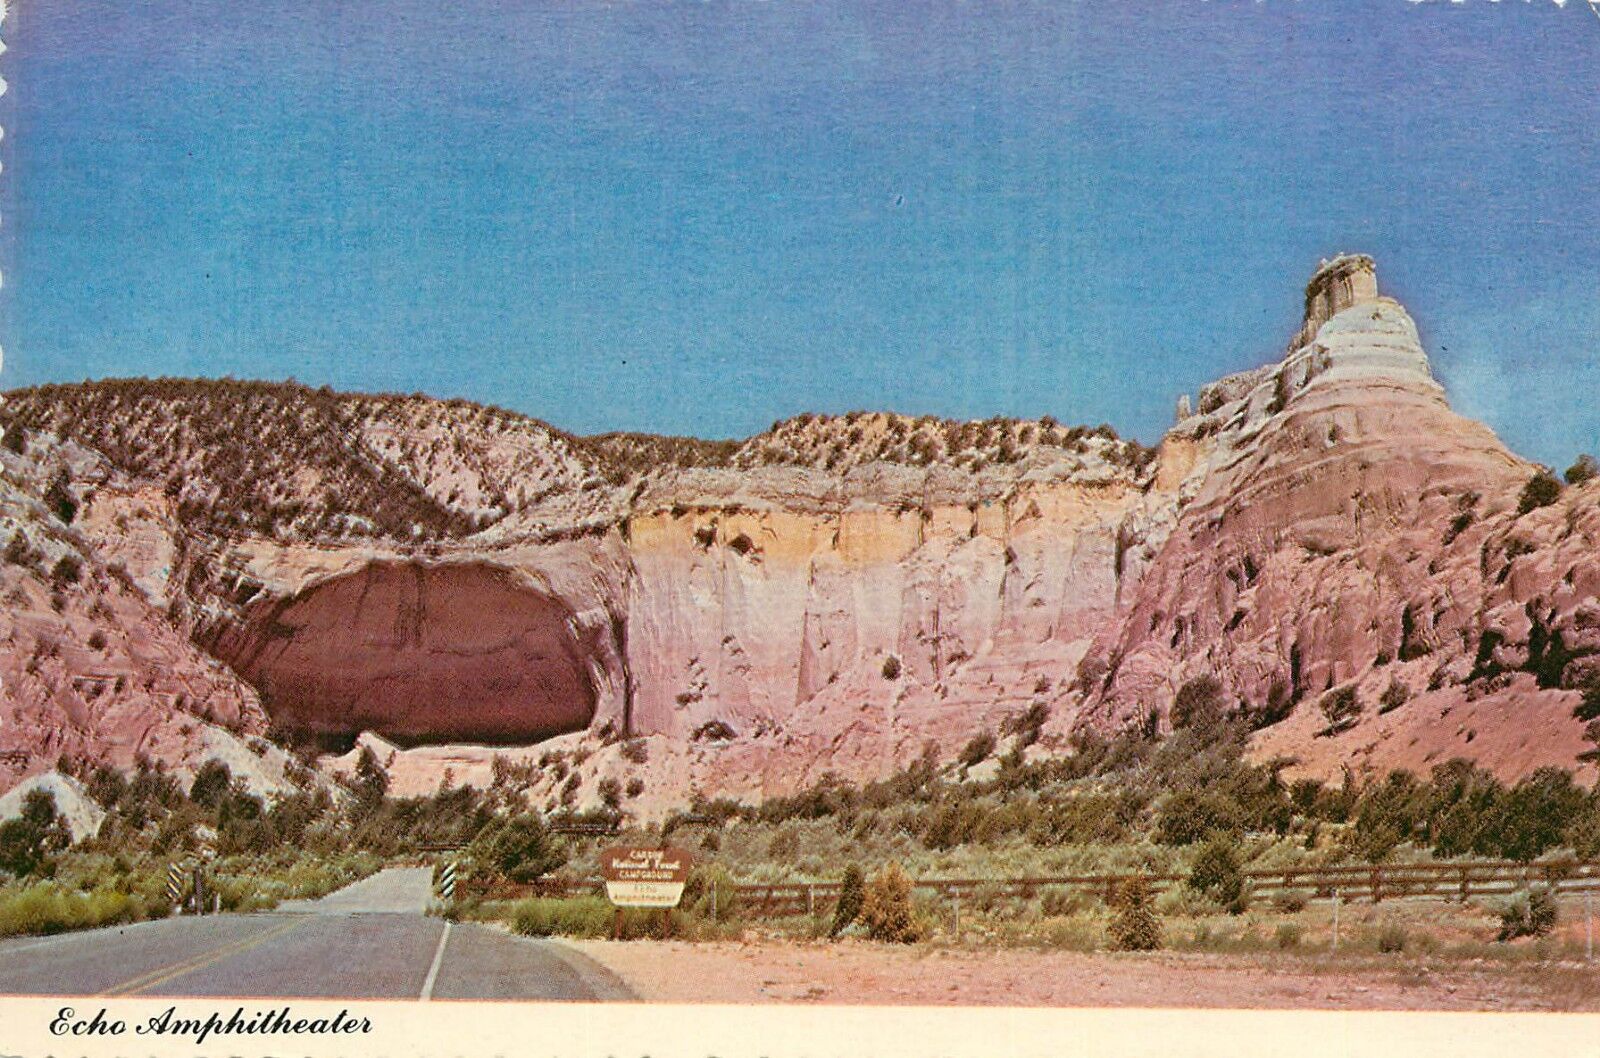 Echo Amphitheater Carson National Forest New Mexico Postcard